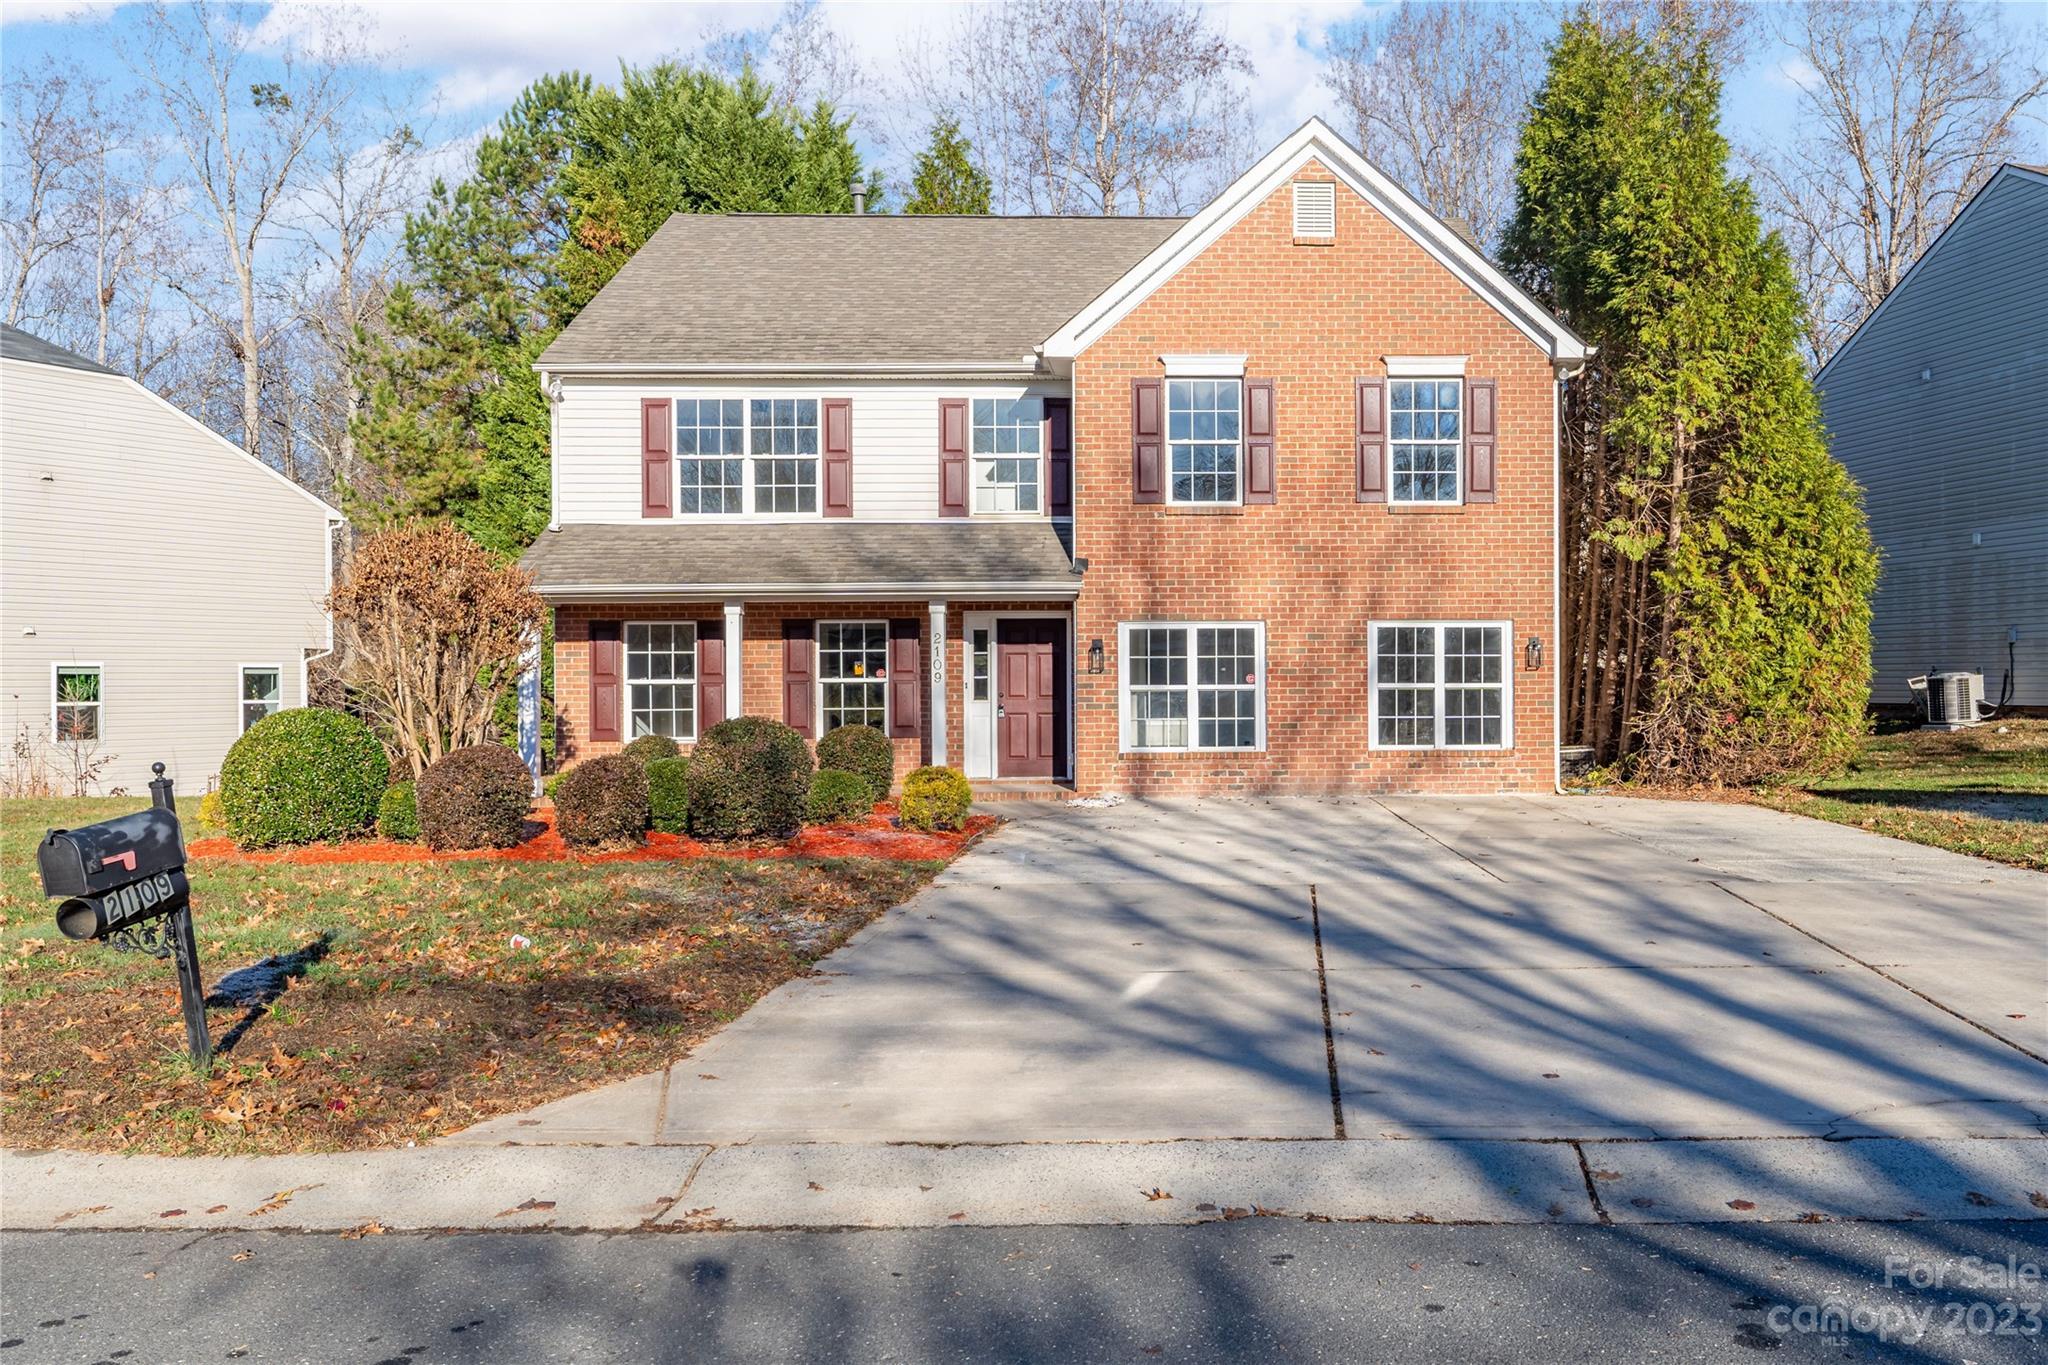 Photo one of 2109 Thorn Crest Dr Waxhaw NC 28173 | MLS 4094052